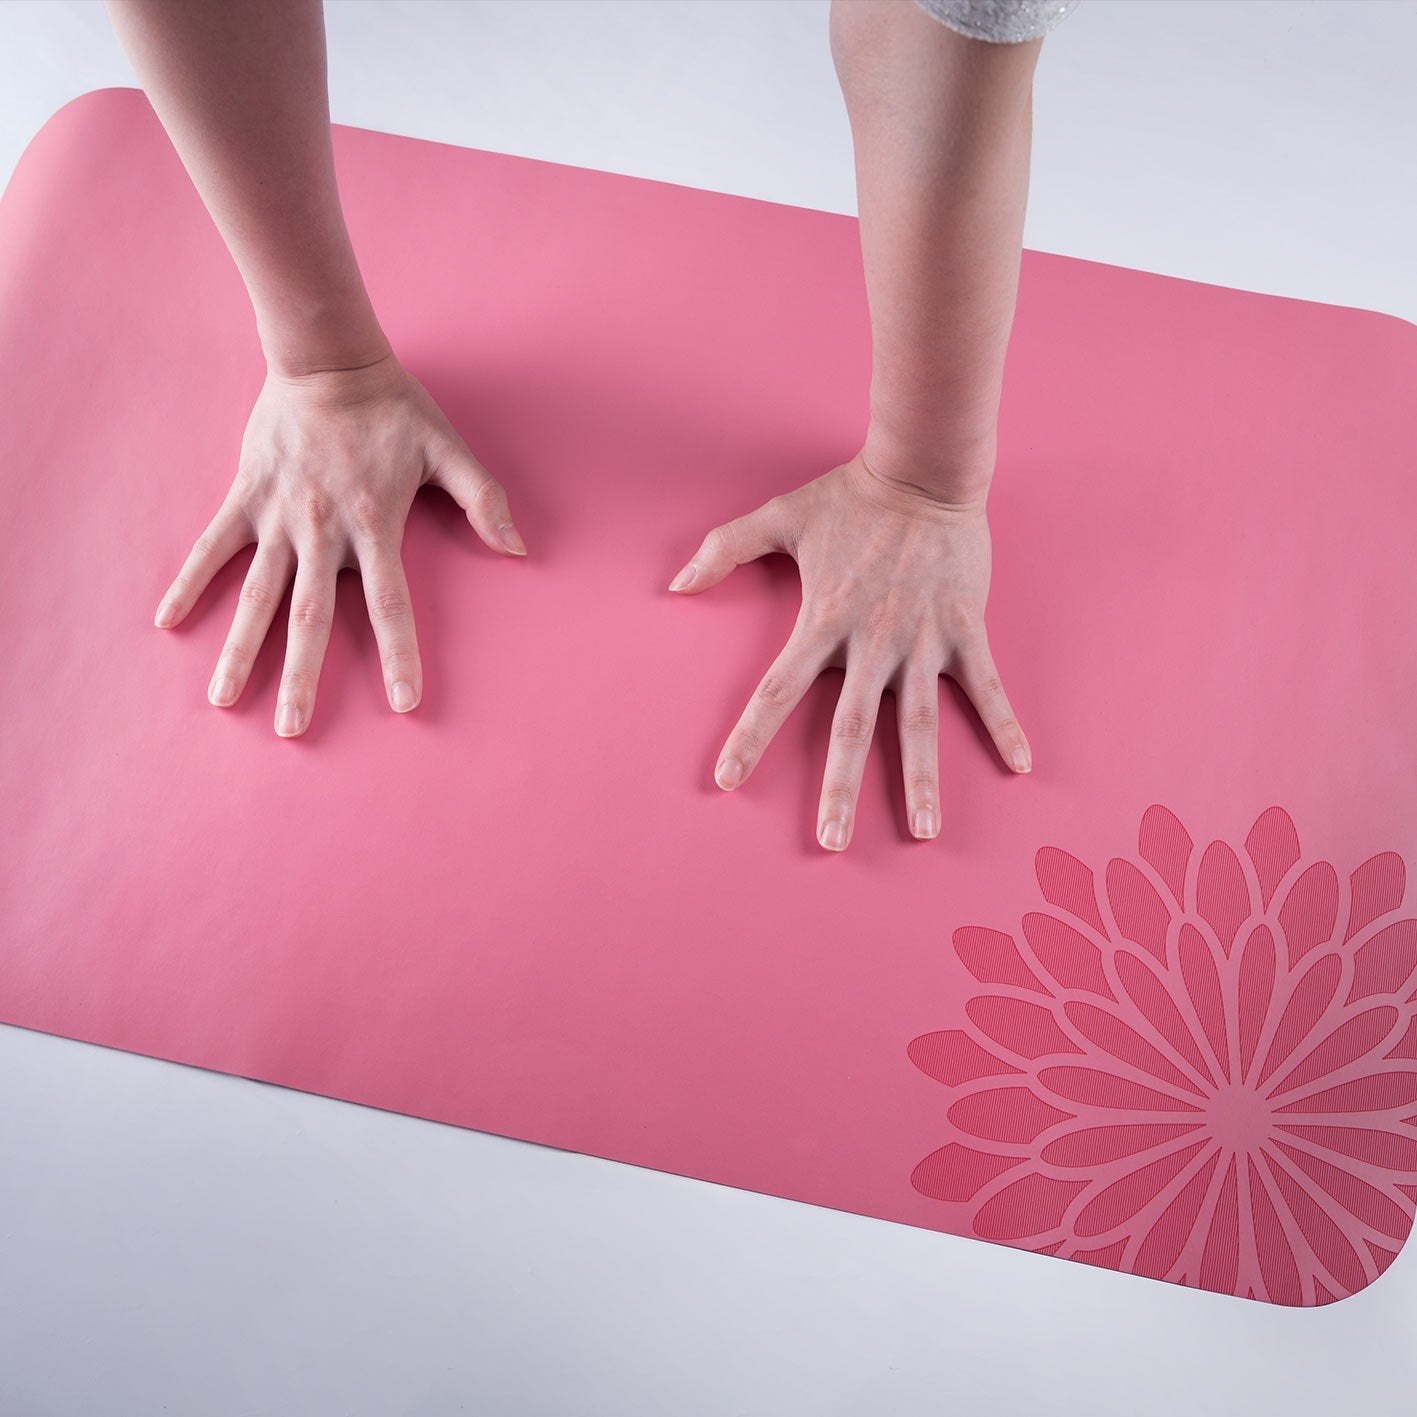 easyoga Breathin' Space Pro Mat - Hand Size - R3 Rosy Red